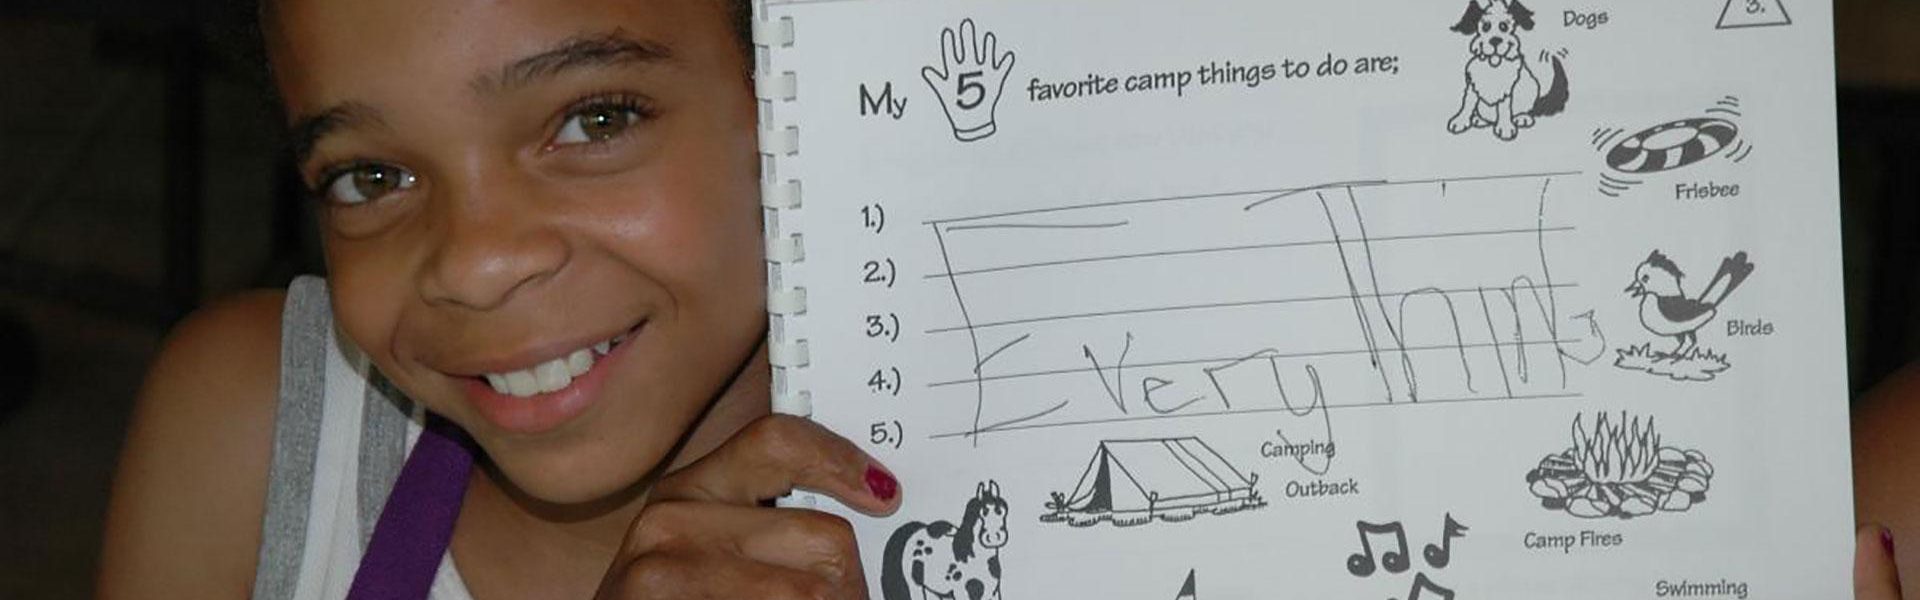 Young girl holding up activity book page the says "My 5 favorite camp things to do are: EVERYTHING"